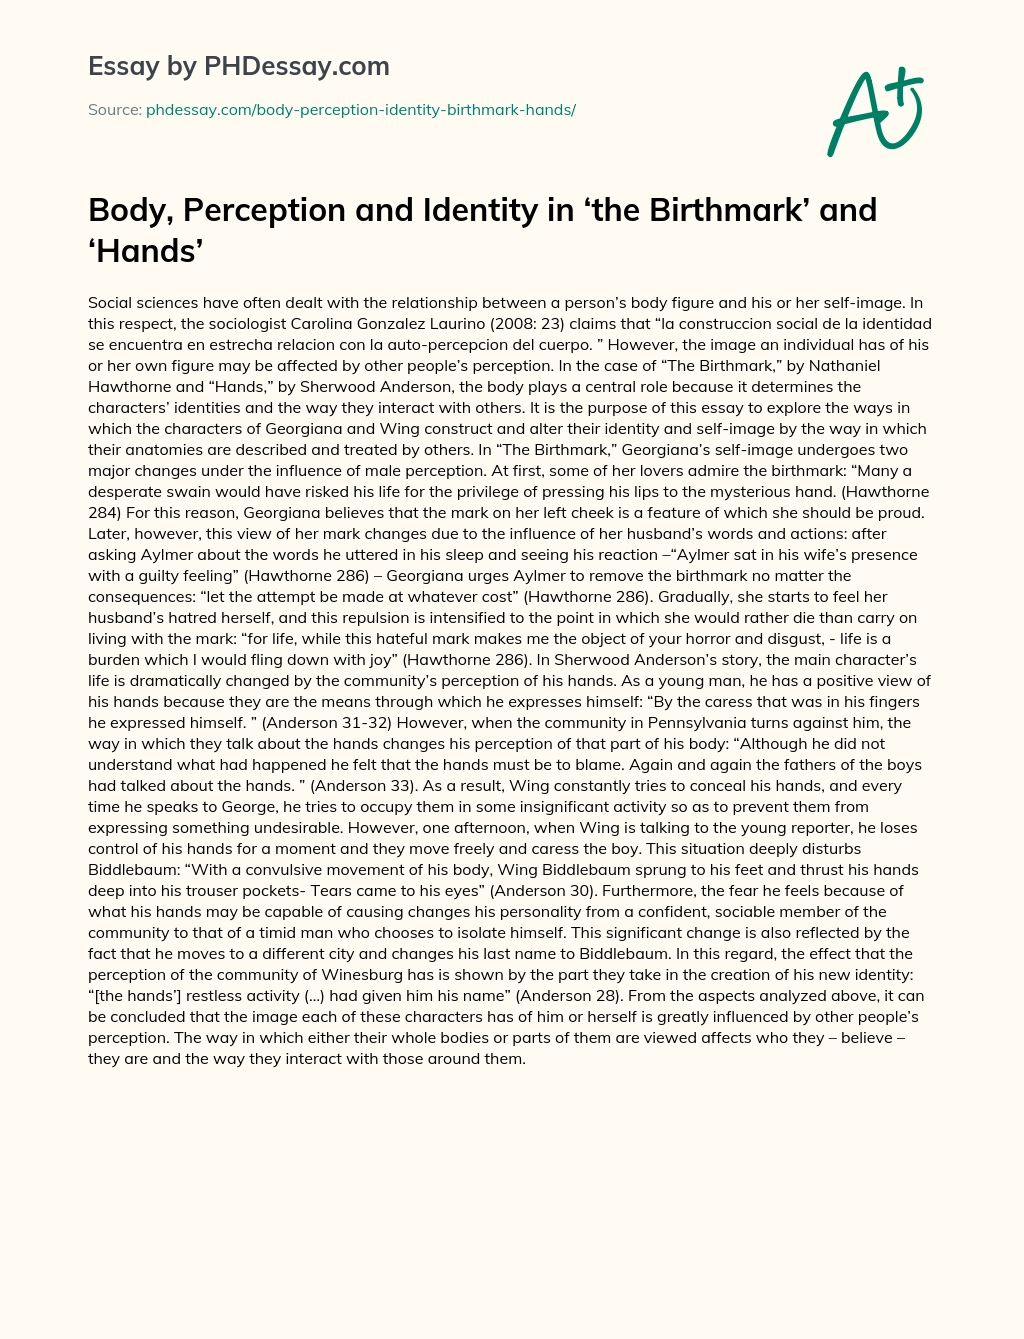 Body, Perception and Identity in ‘the Birthmark’ and ‘Hands’ essay